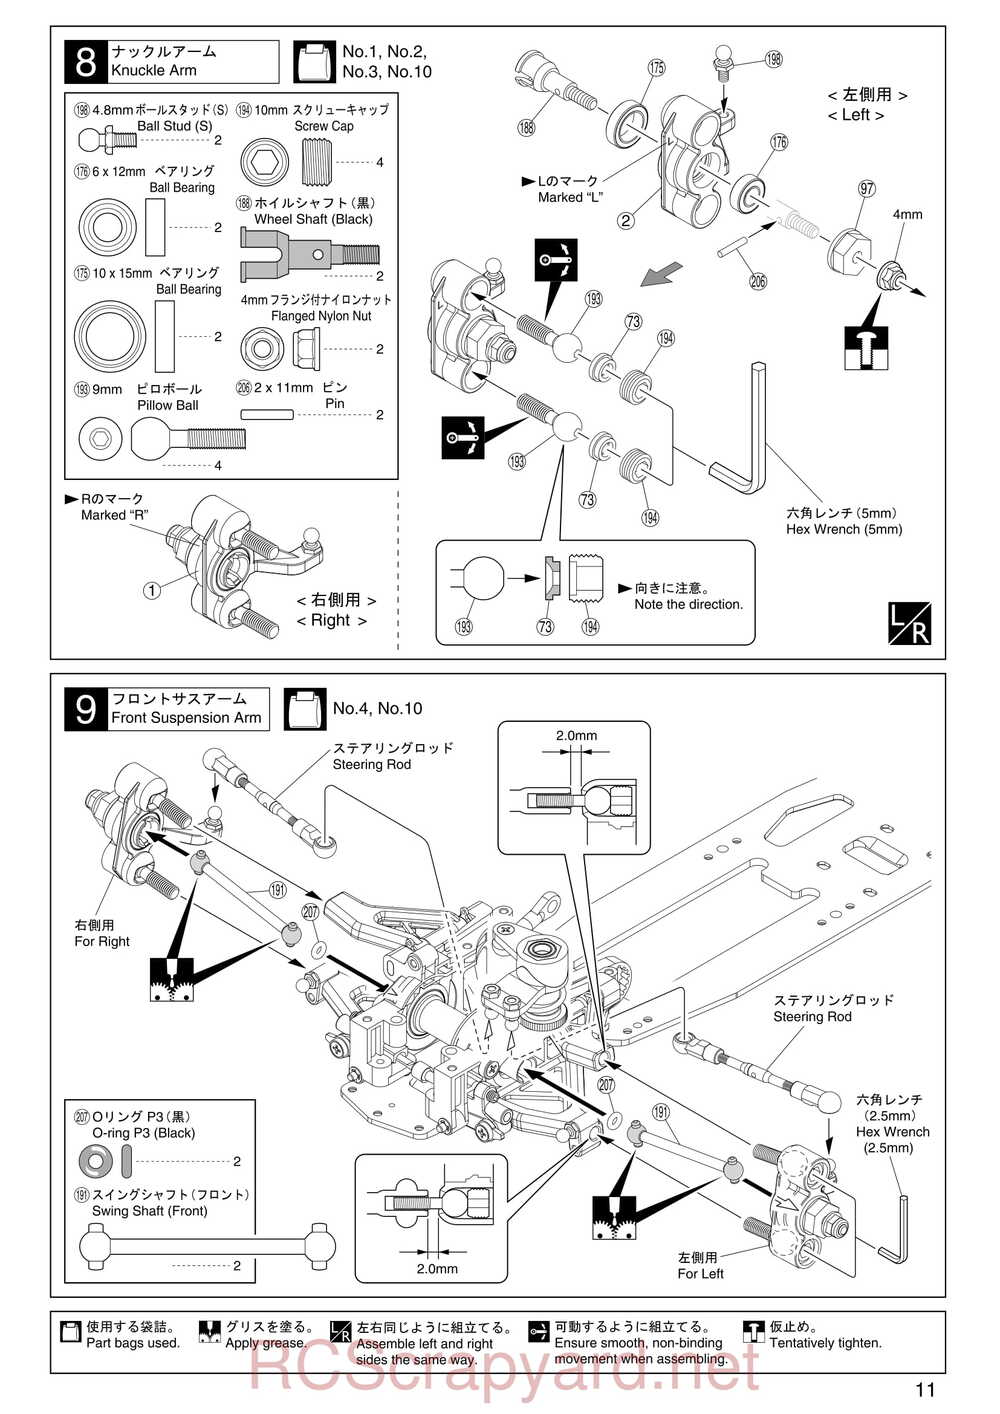 Kyosho - 31257 - V-One RRR Rubber - Manual - Page 11